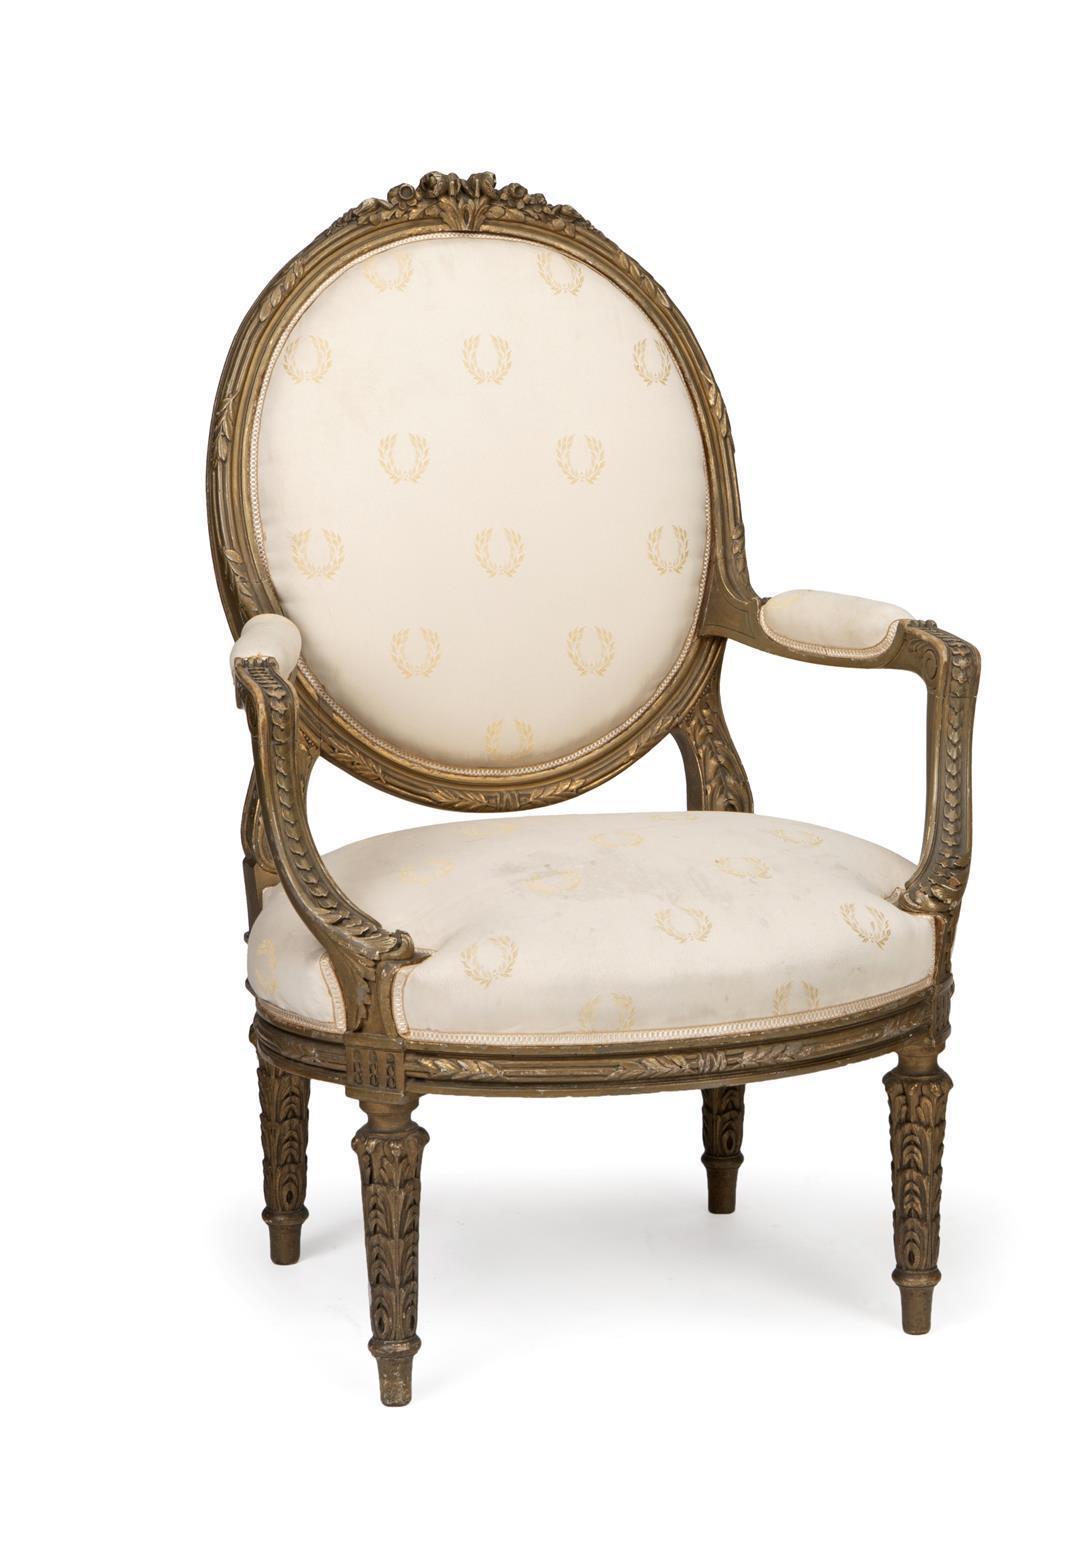 Hand-Carved Pair of French Giltwood Armchairs, 19th Century